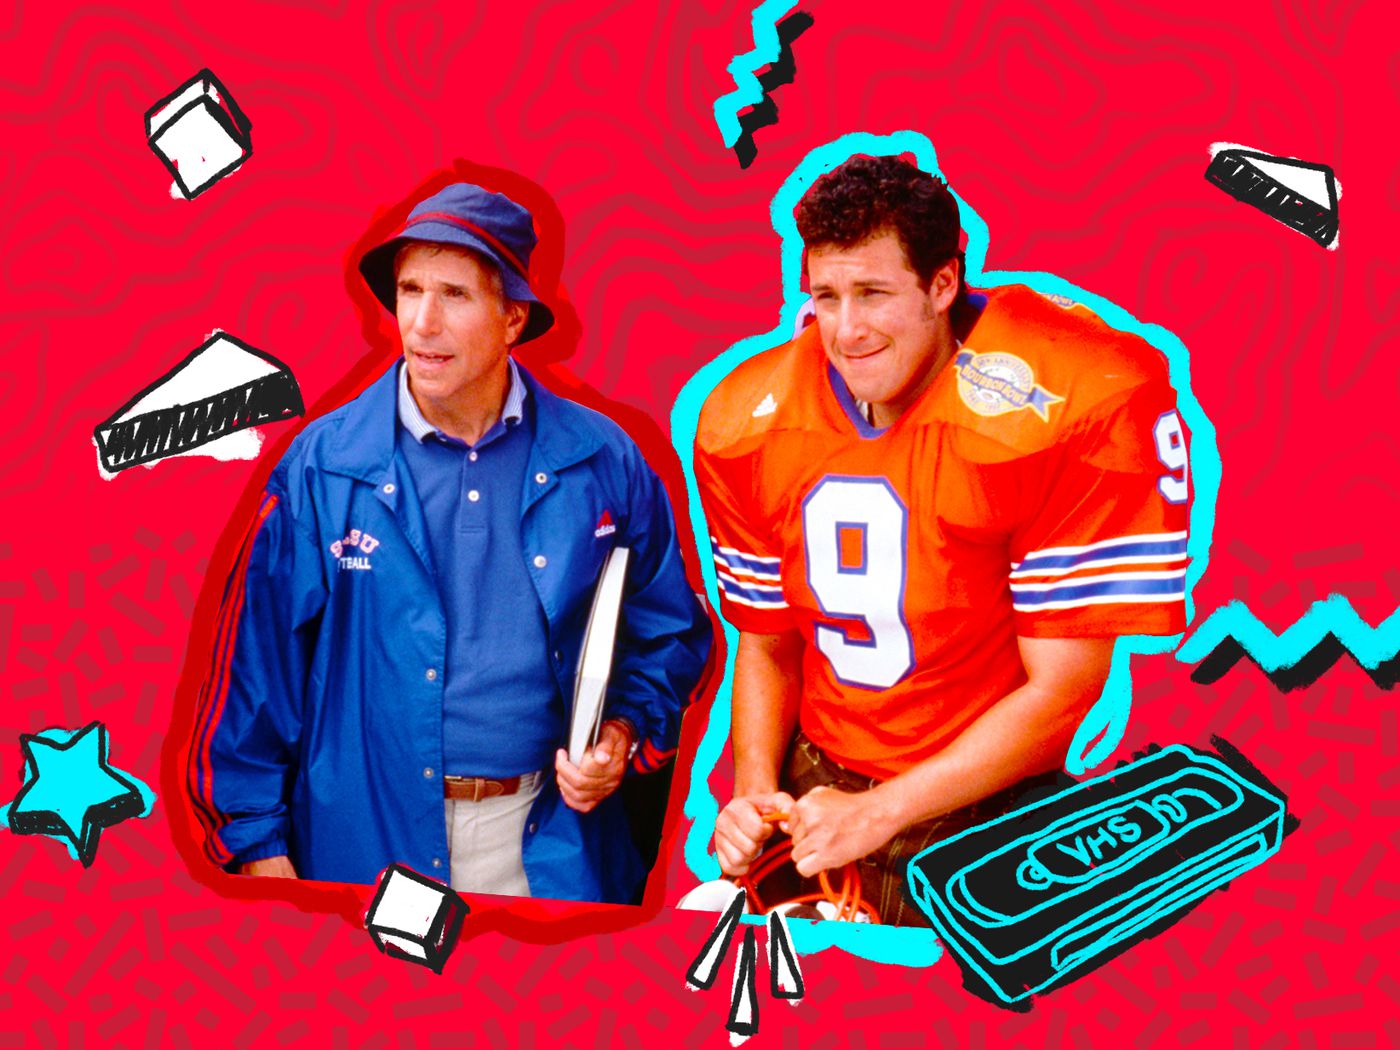 How the people behind 'The Waterboy' created a cult classic.